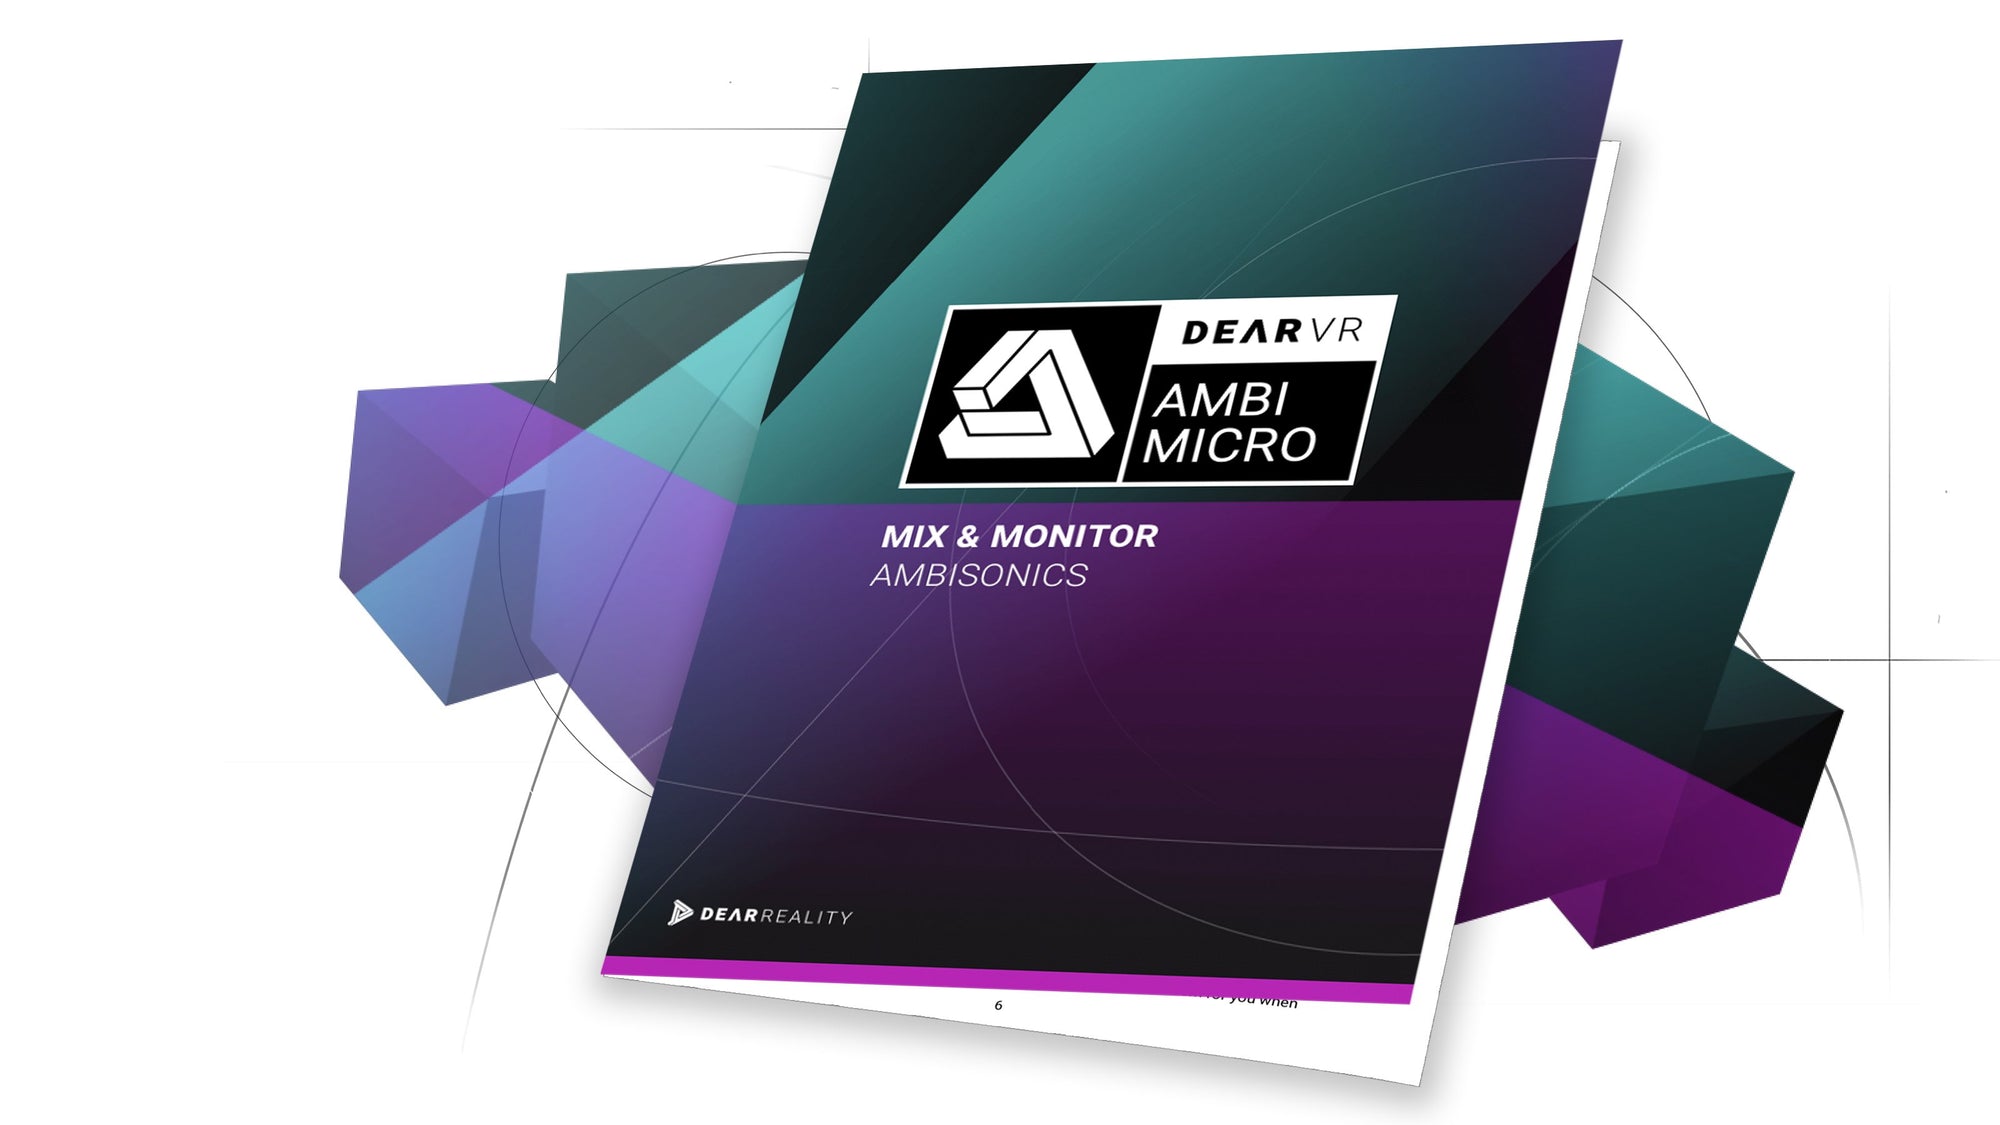 Download the dearVR AMBI MICRO manual to get detailed insights